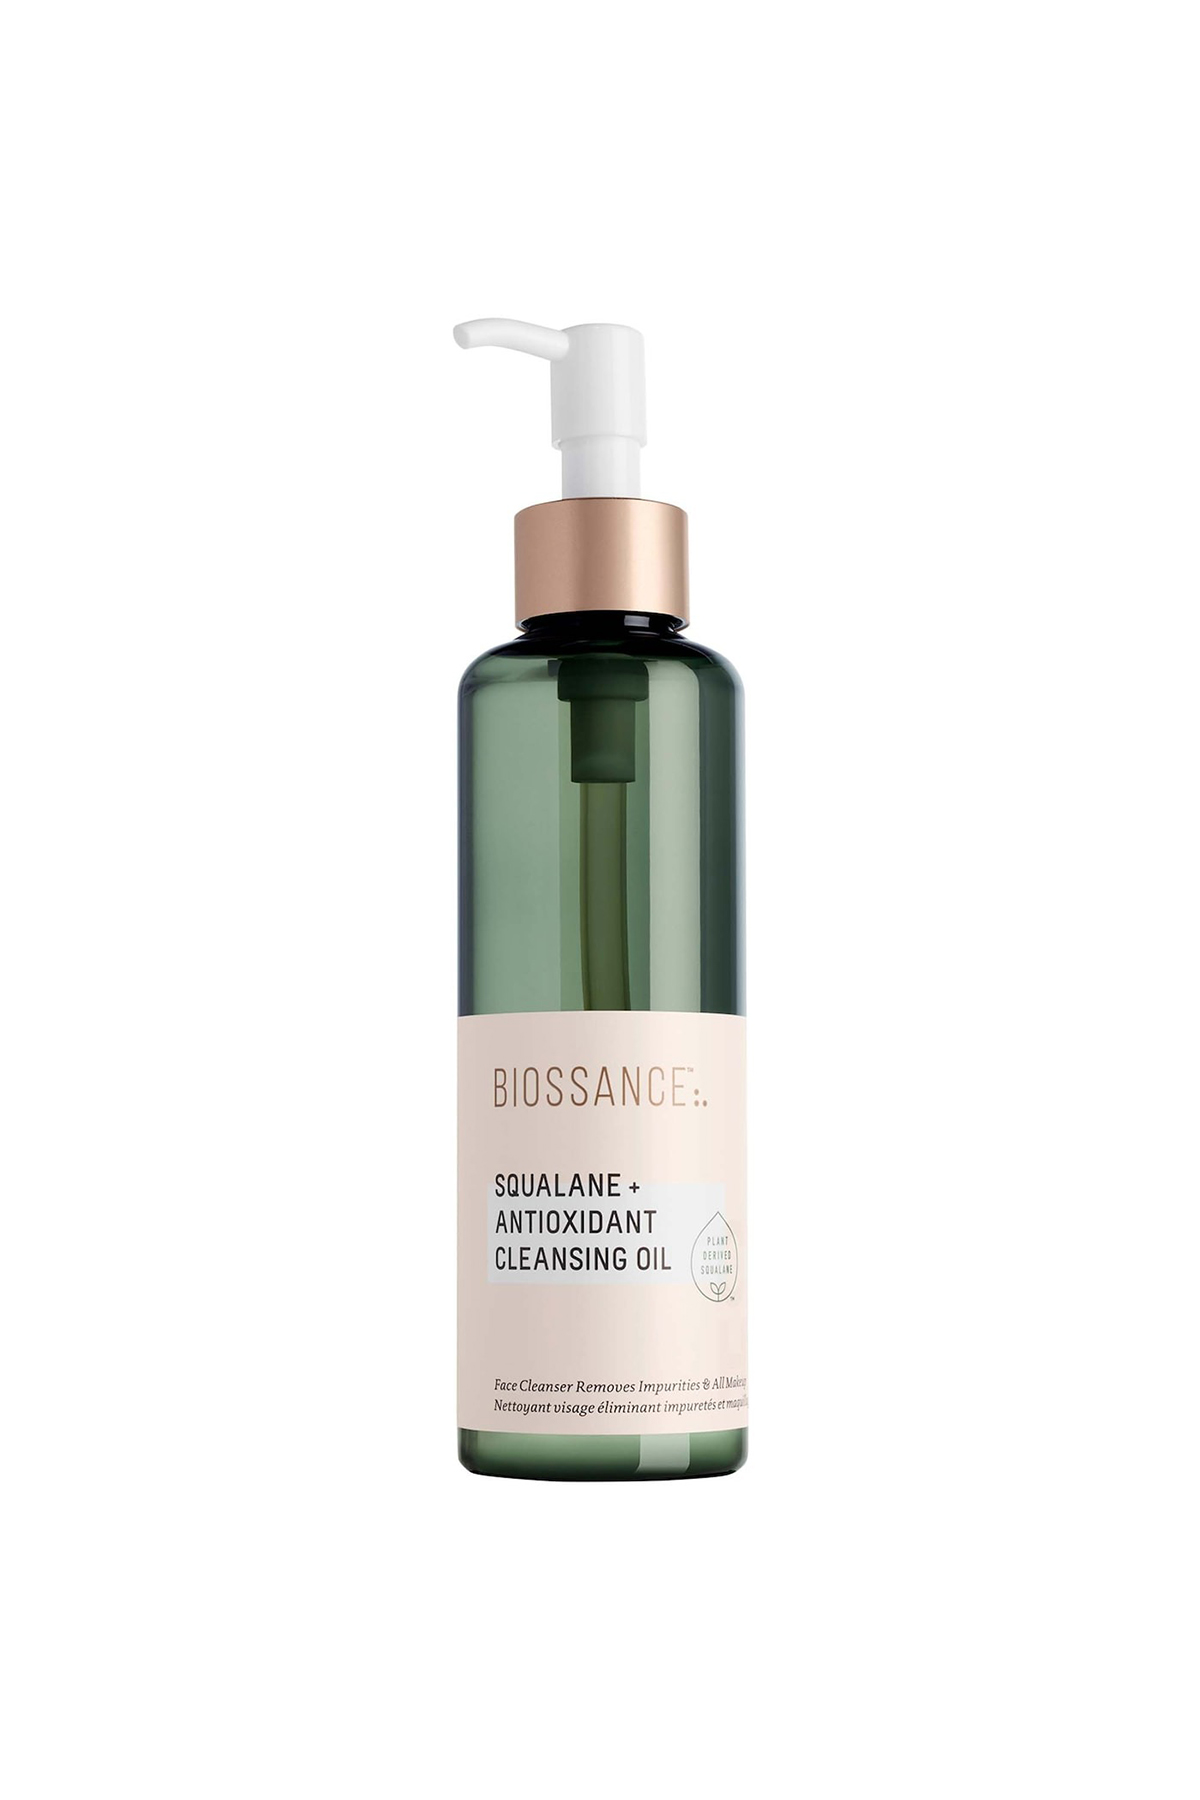 Biossance Squalane and Antioxidant Cleansing Oil